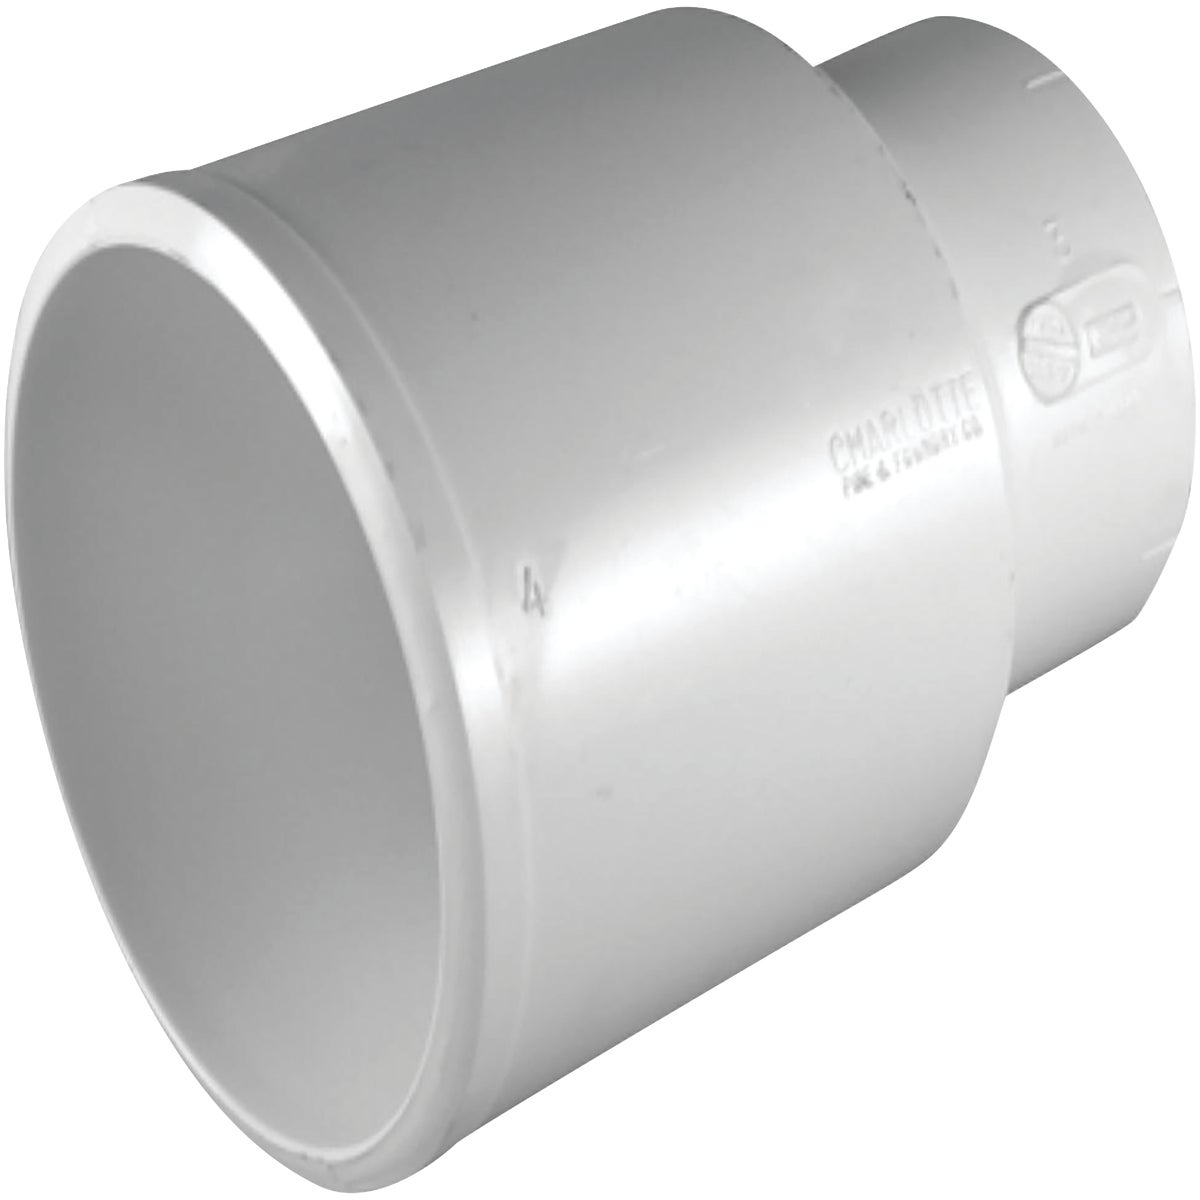 Charlotte Pipe 4 In. Schedule 30 DWV 600 Series PVC Coupling